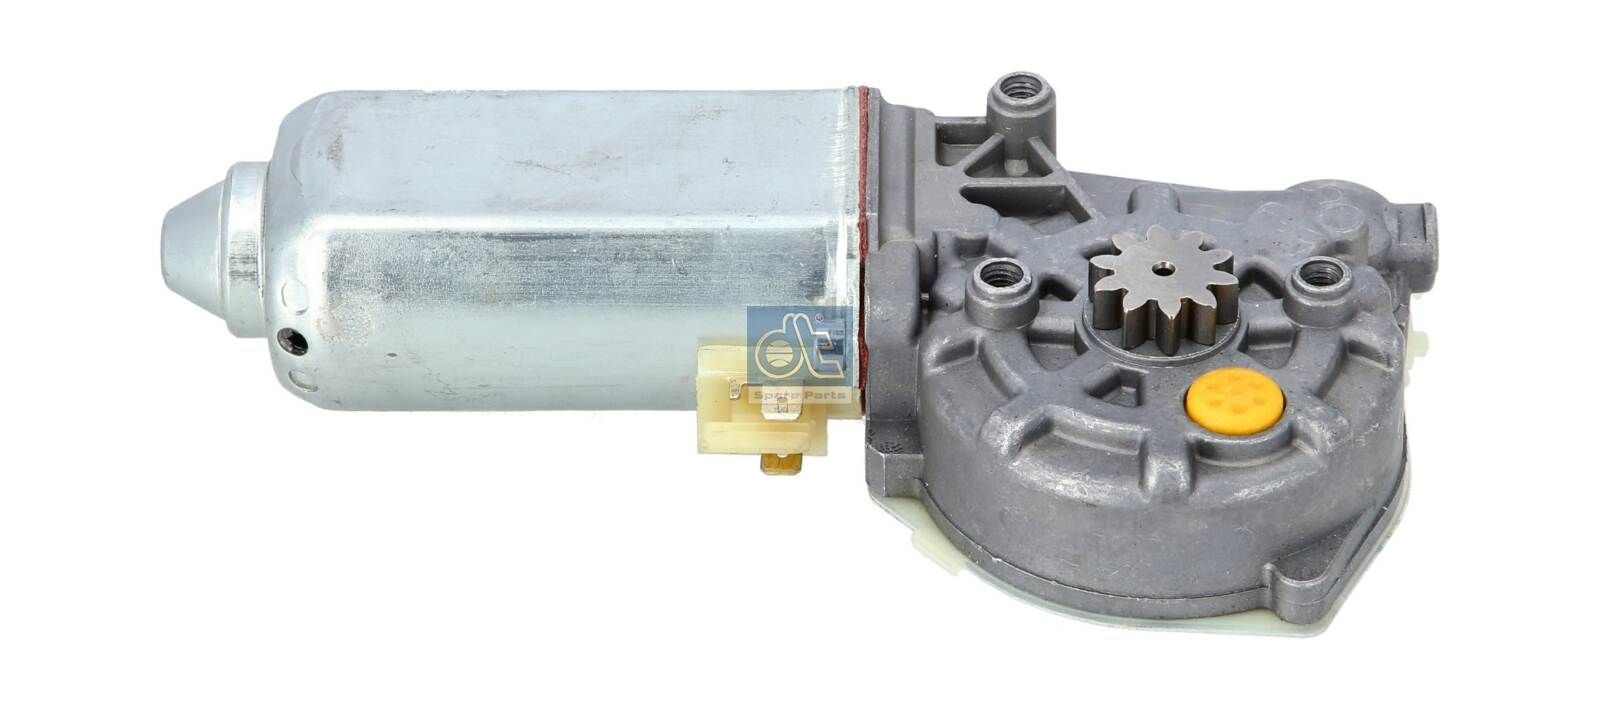 DT Spare Parts 3.85070 Electric Motor cheap in online store